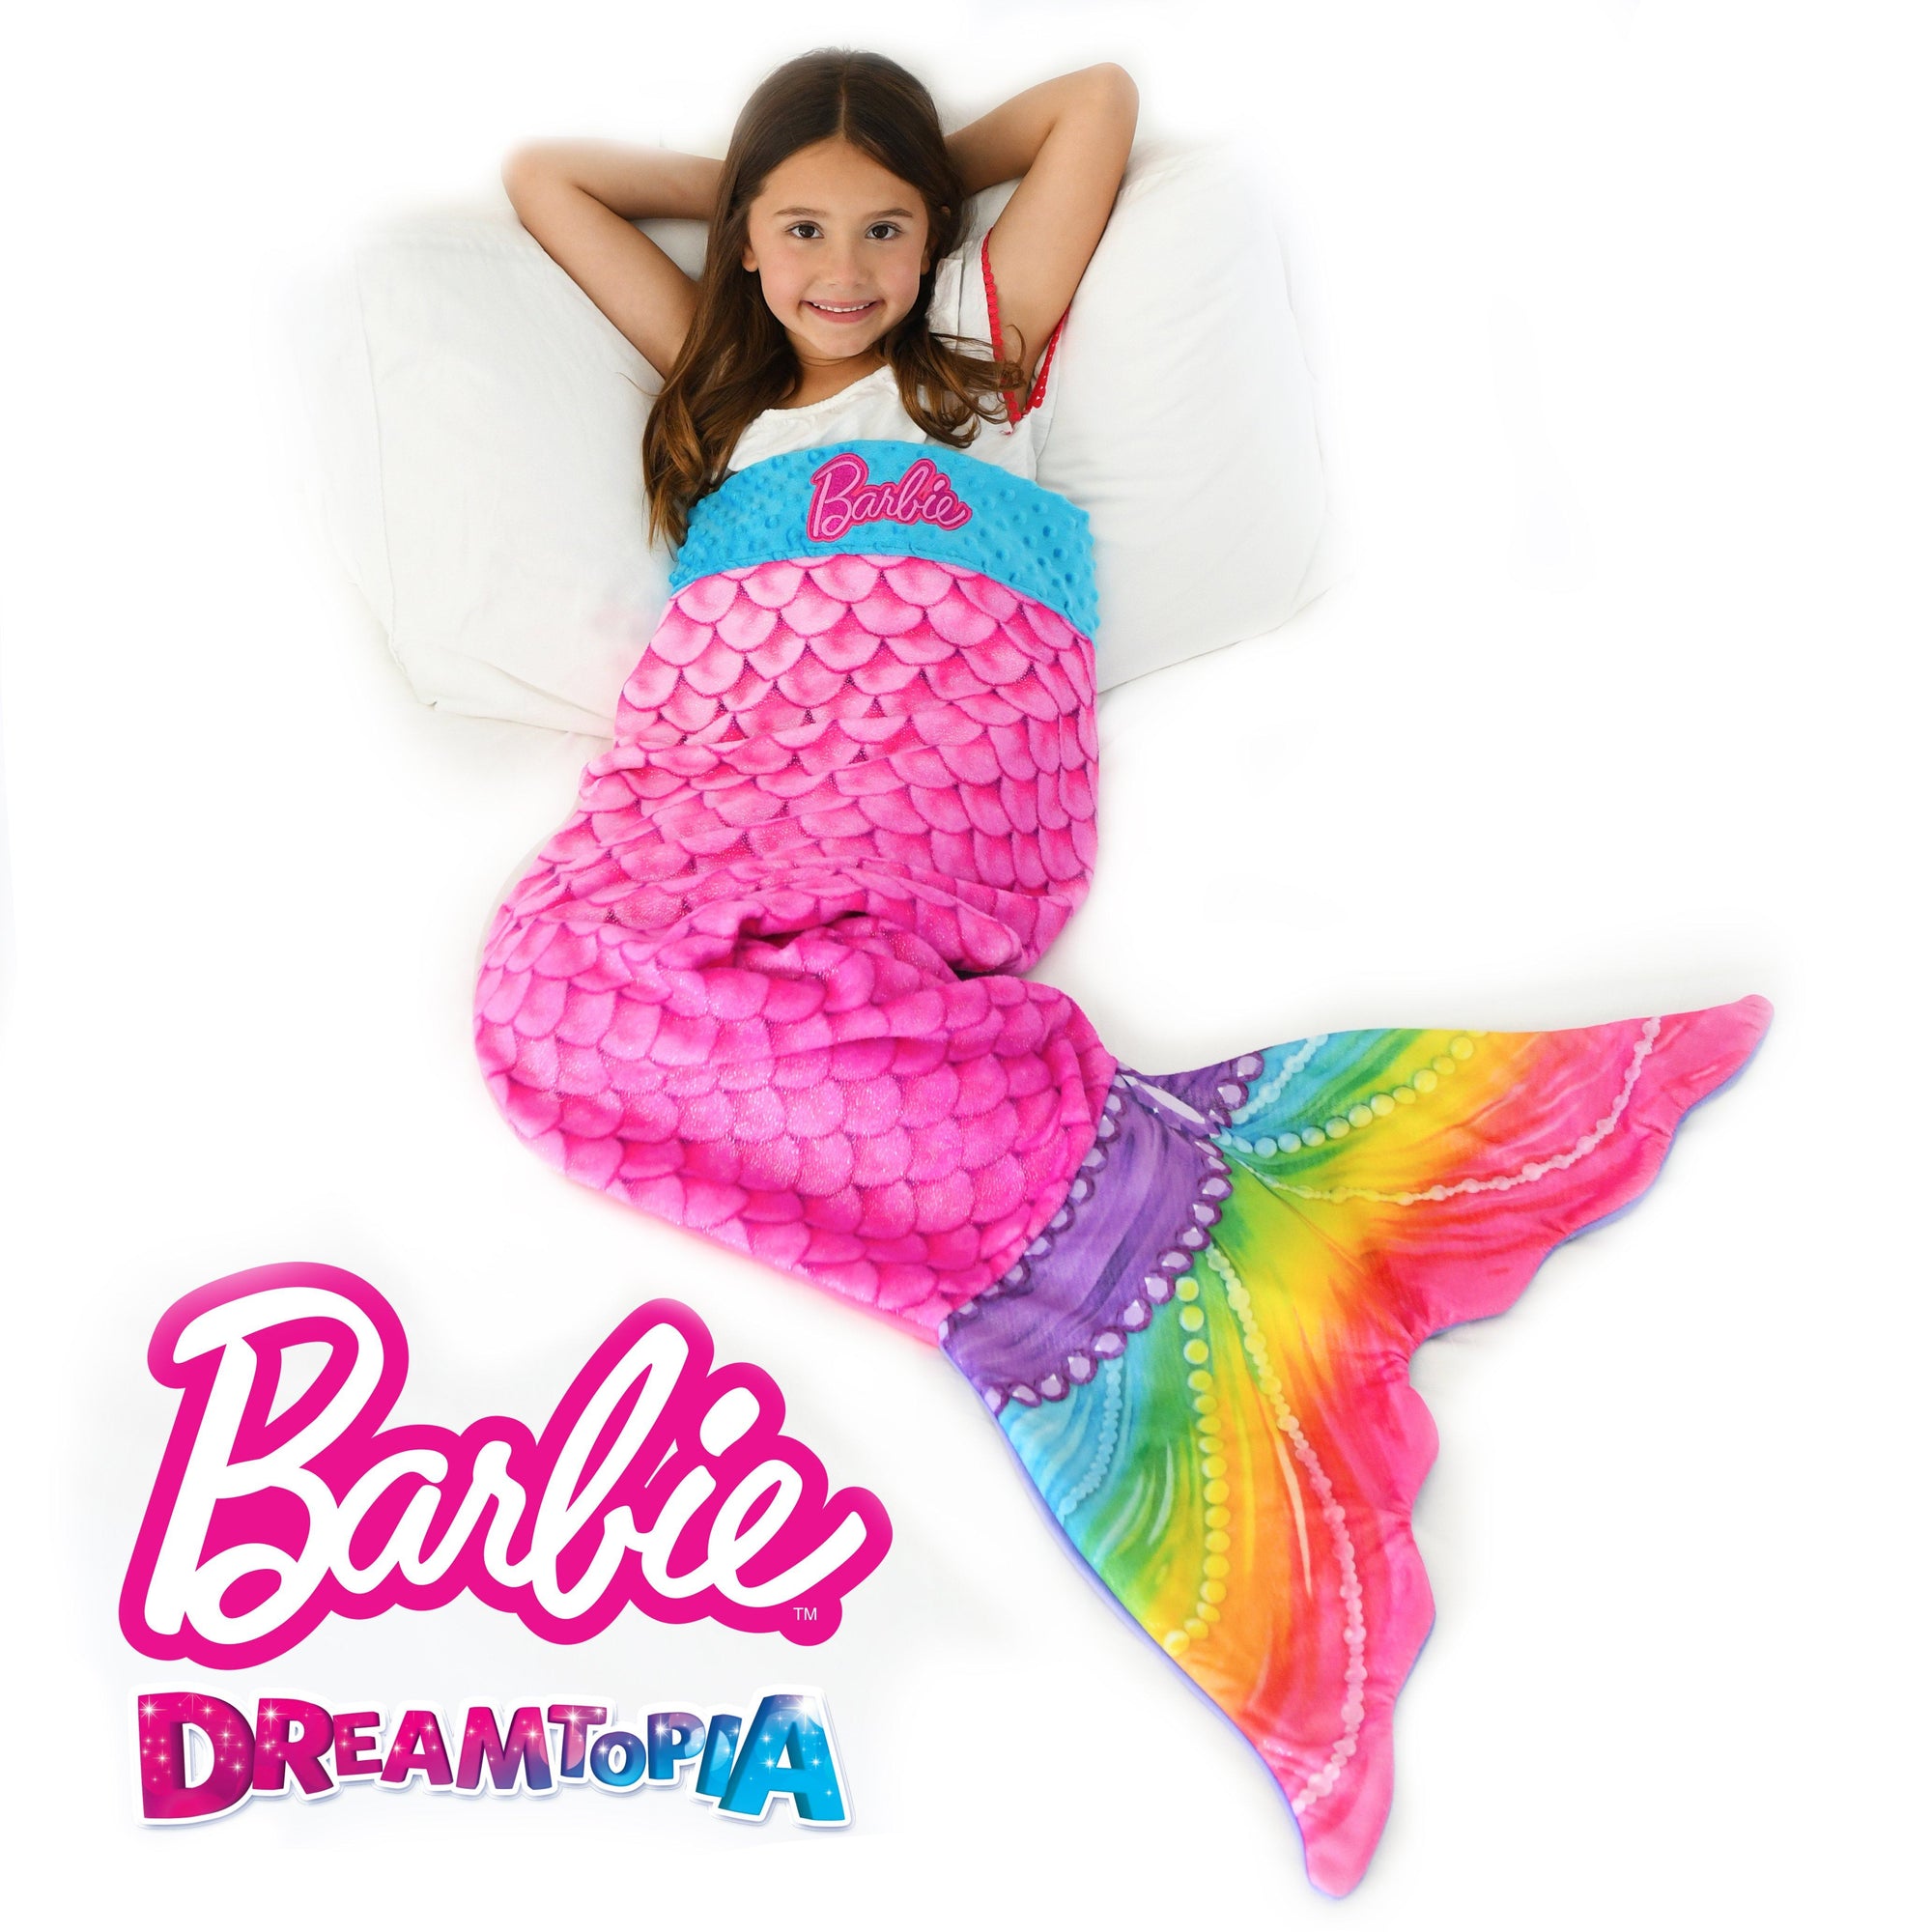 mermaid tails for barbies